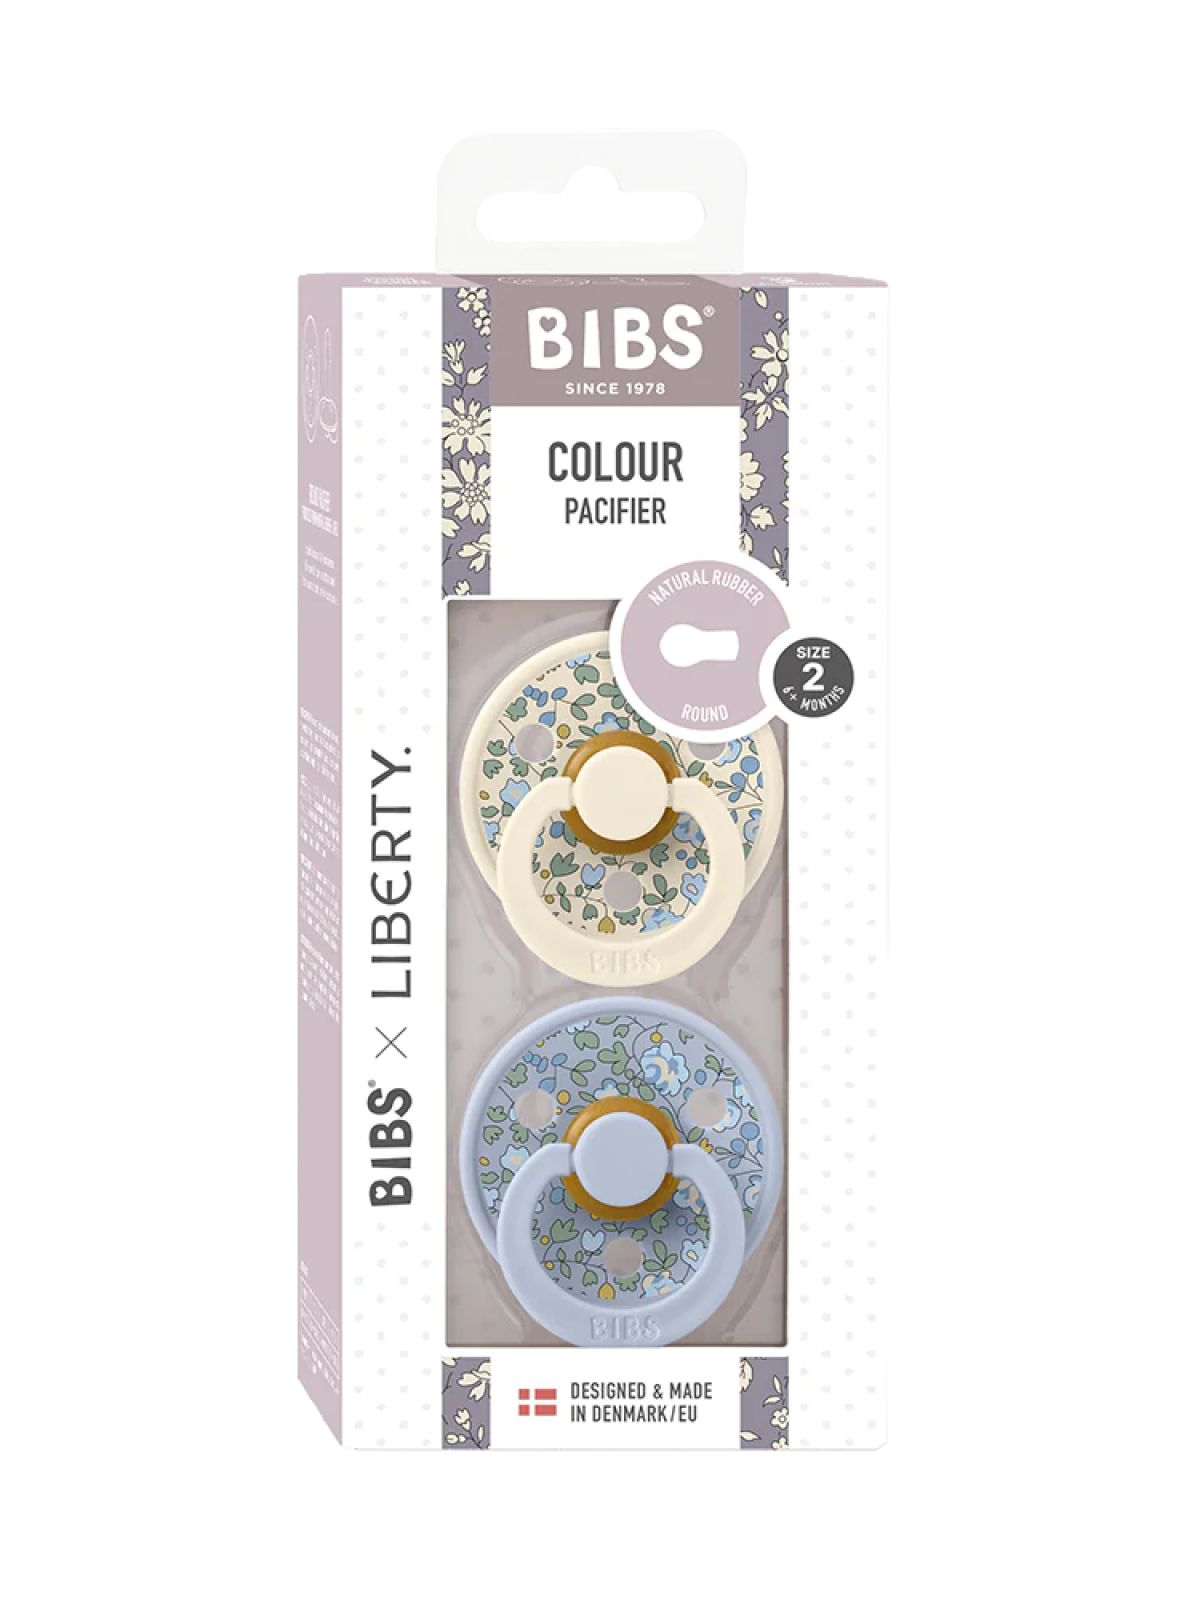 BIBS x LIBERTY Colour Round Natural Rubber Latex Pacifier 2 Pack, Eloise Dusty Blue Mix